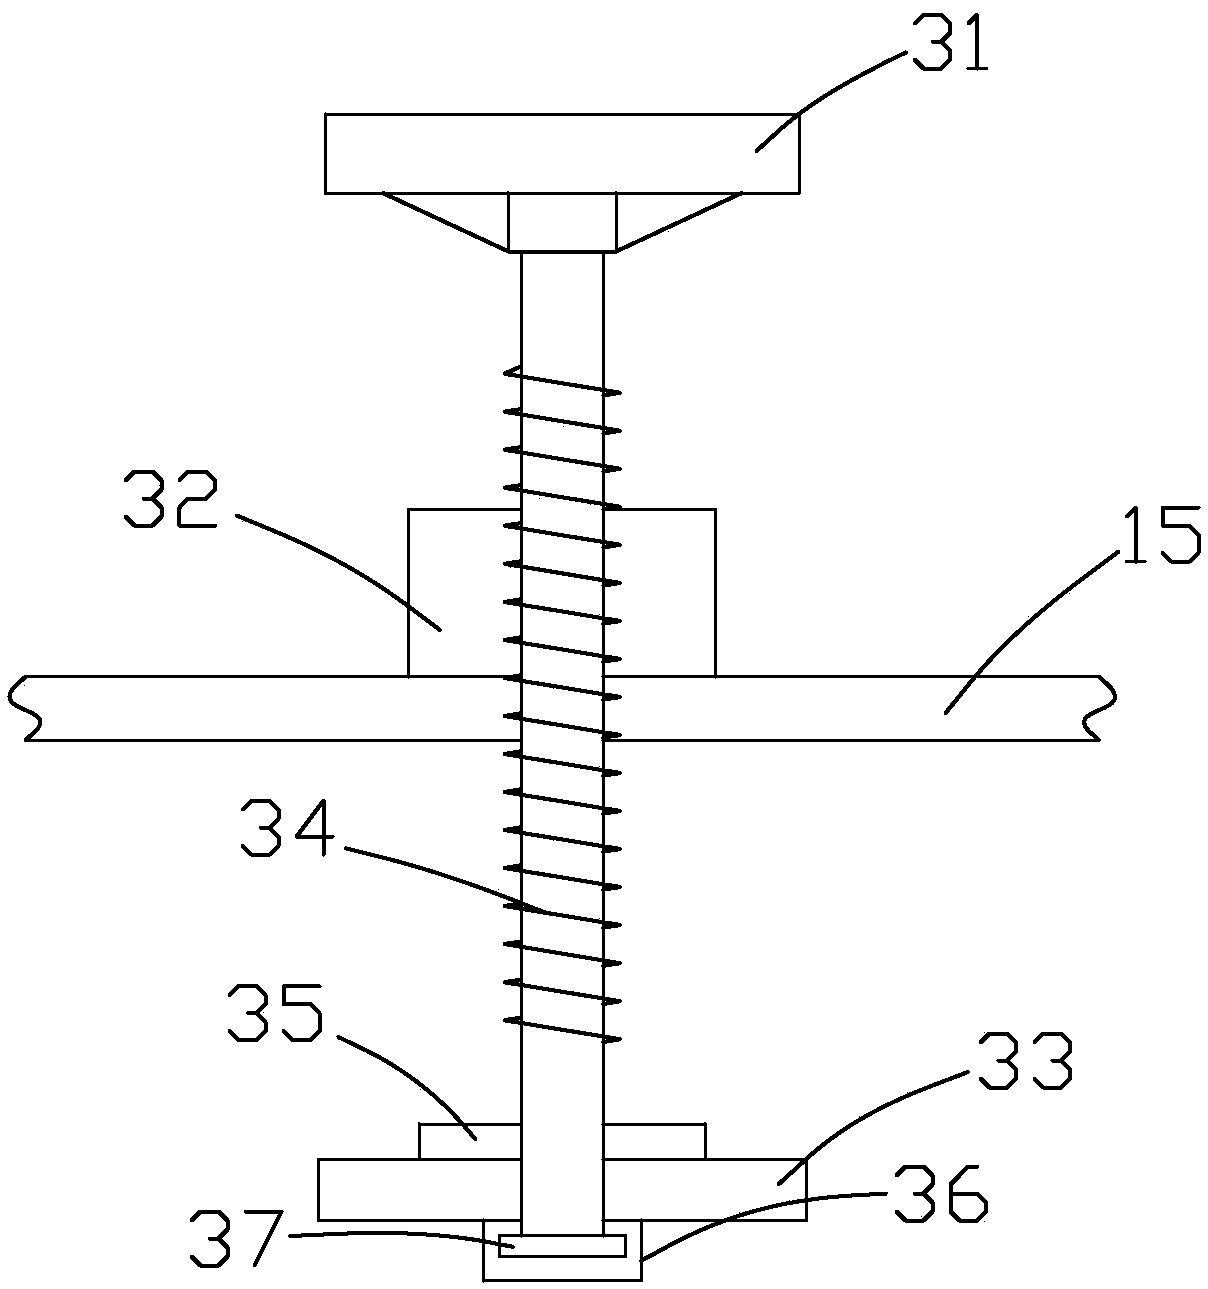 Paper cutting device used for color printing and packaging